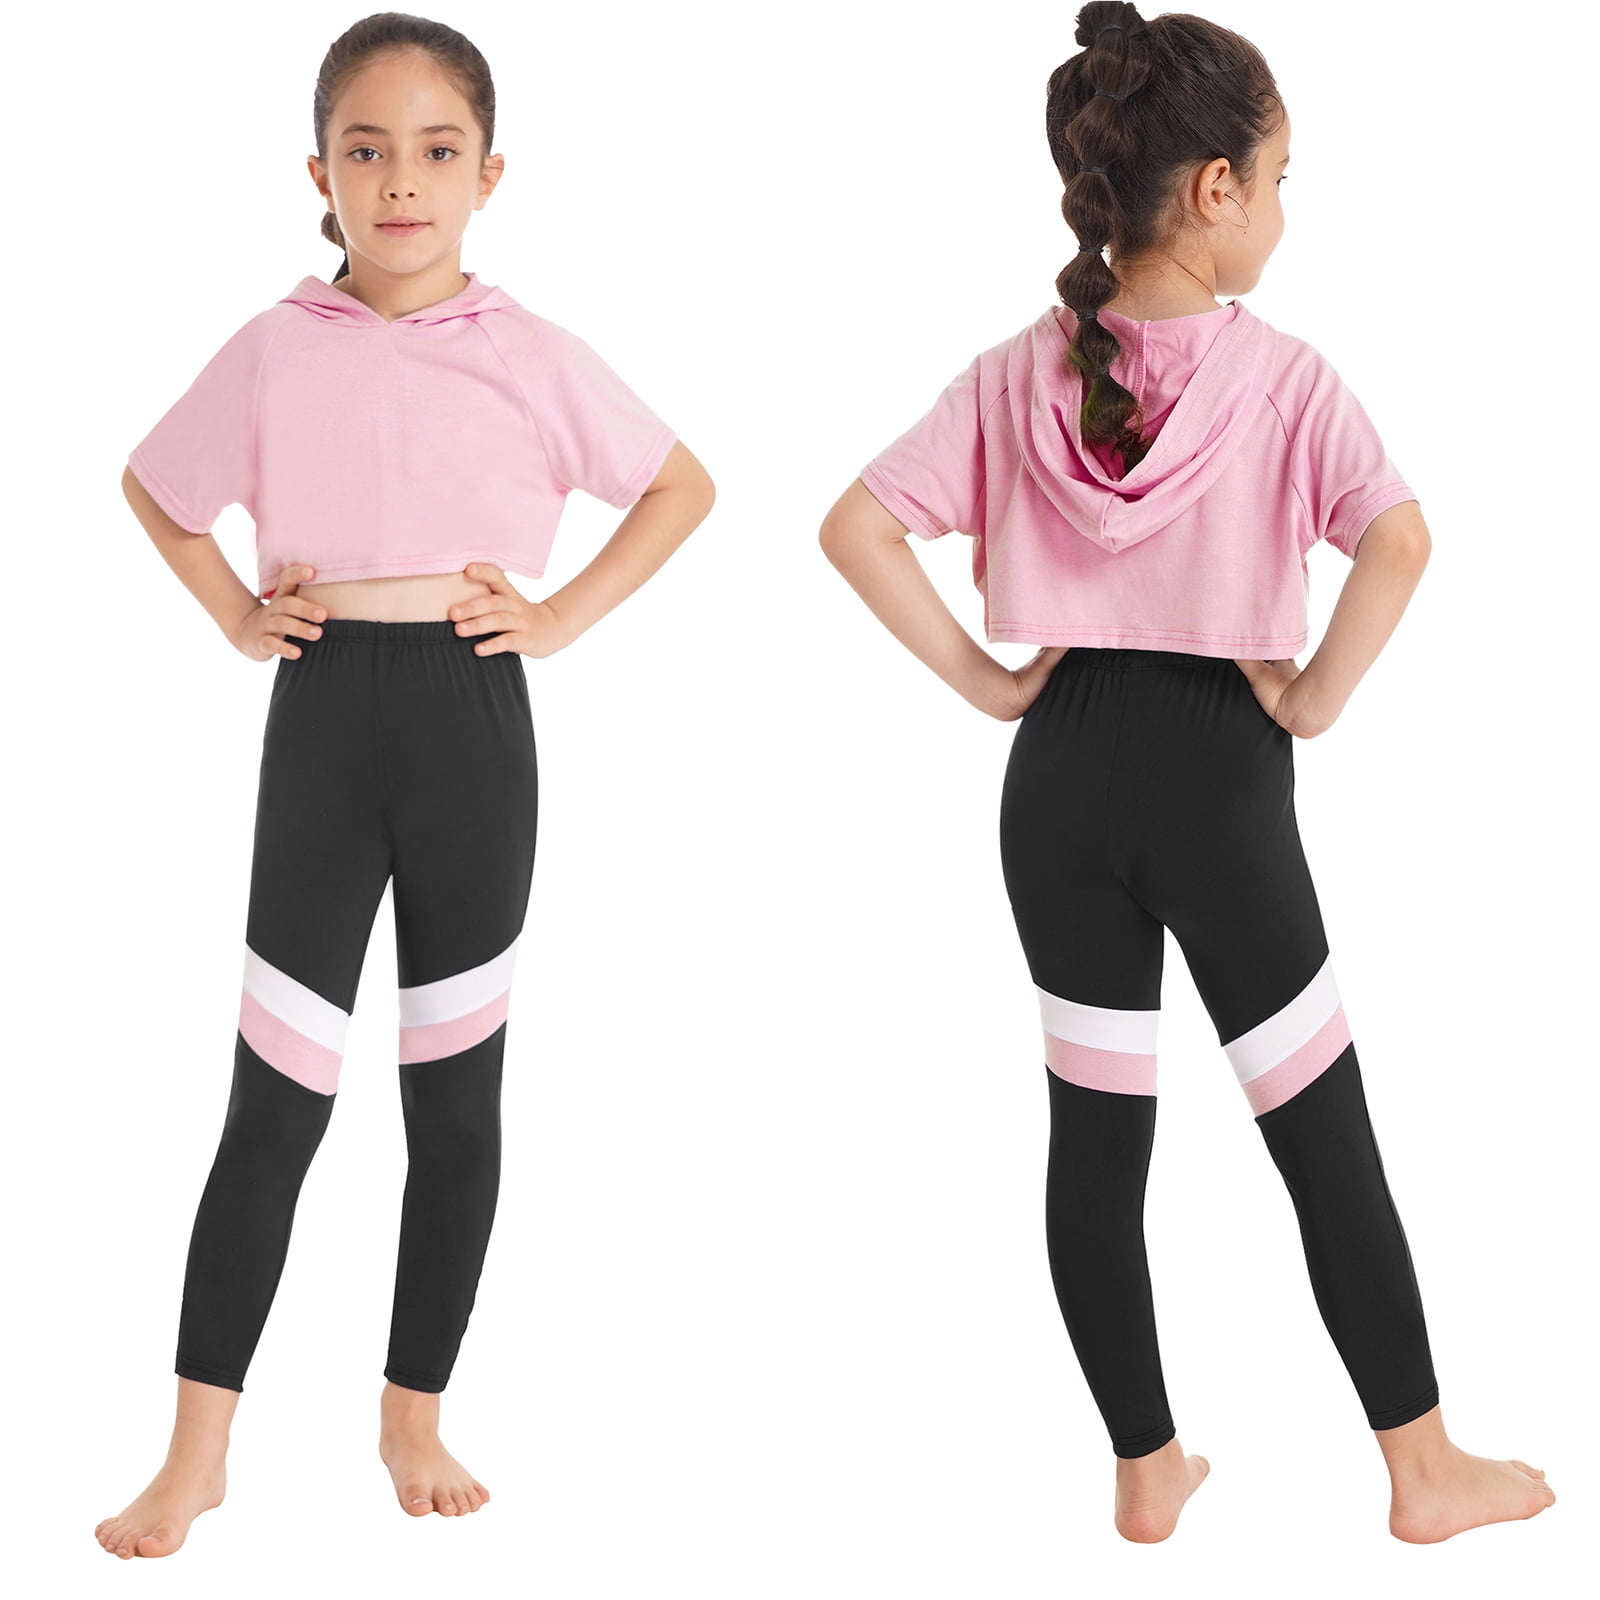 Kids Girls Two Pieces Sport Suits Printed Racer Back Crops Tank Tops  Leggings | eBay